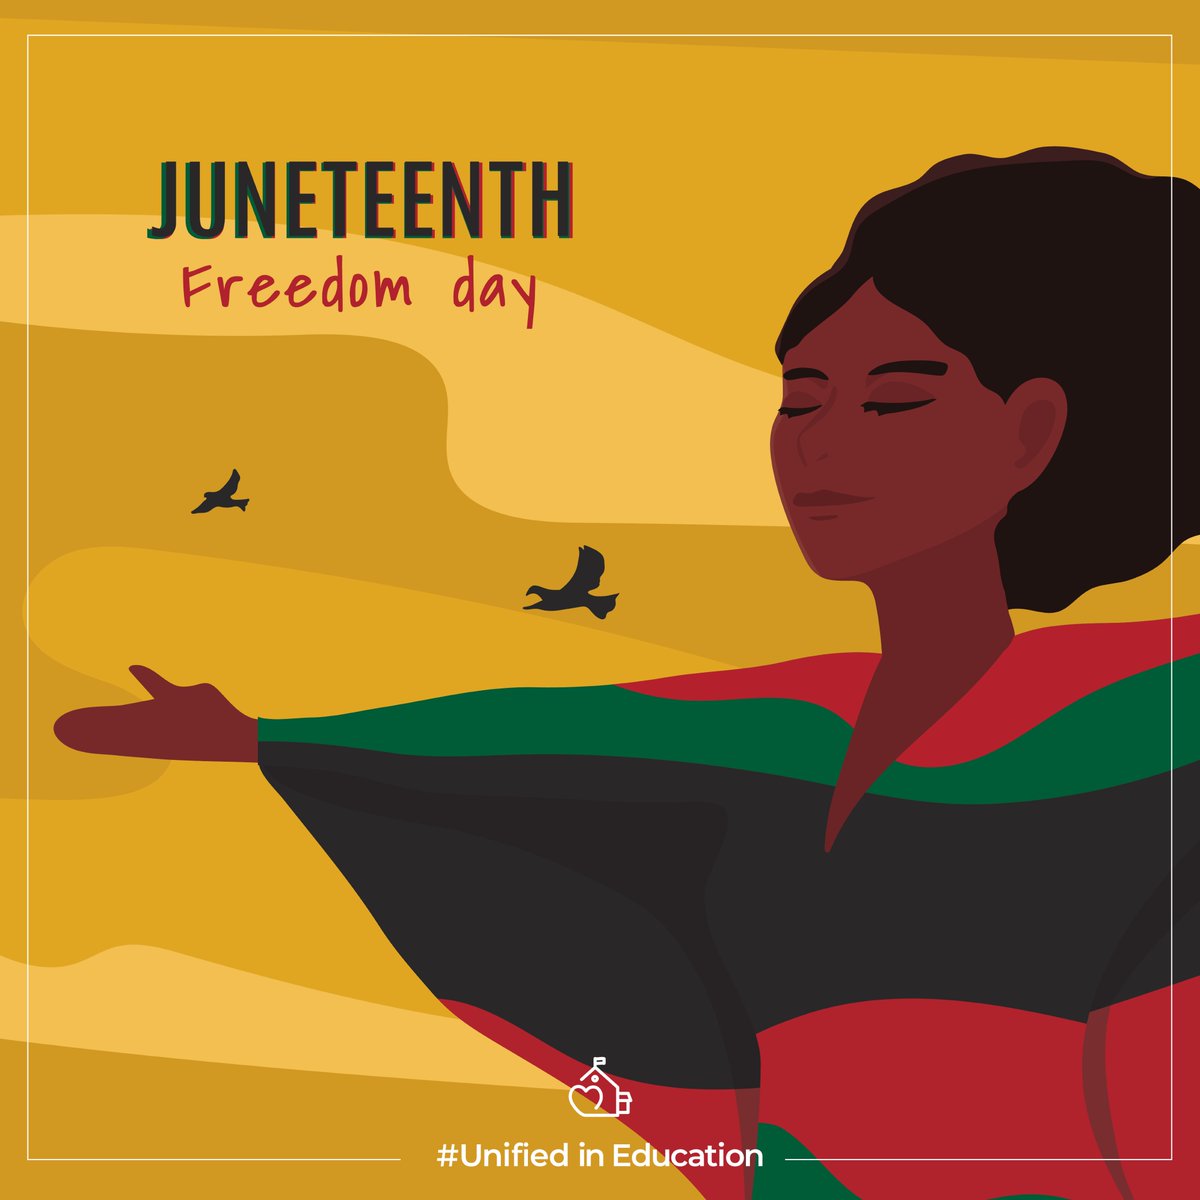 Juneteenth commemorates the emancipation of enslaved African-Americans in the United States. Since 2021, Juneteenth has officially been recognized as a federal holiday. To learn more about the history of Juneteenth, visit the link in our bio, juneteenth.com #Juneteenth